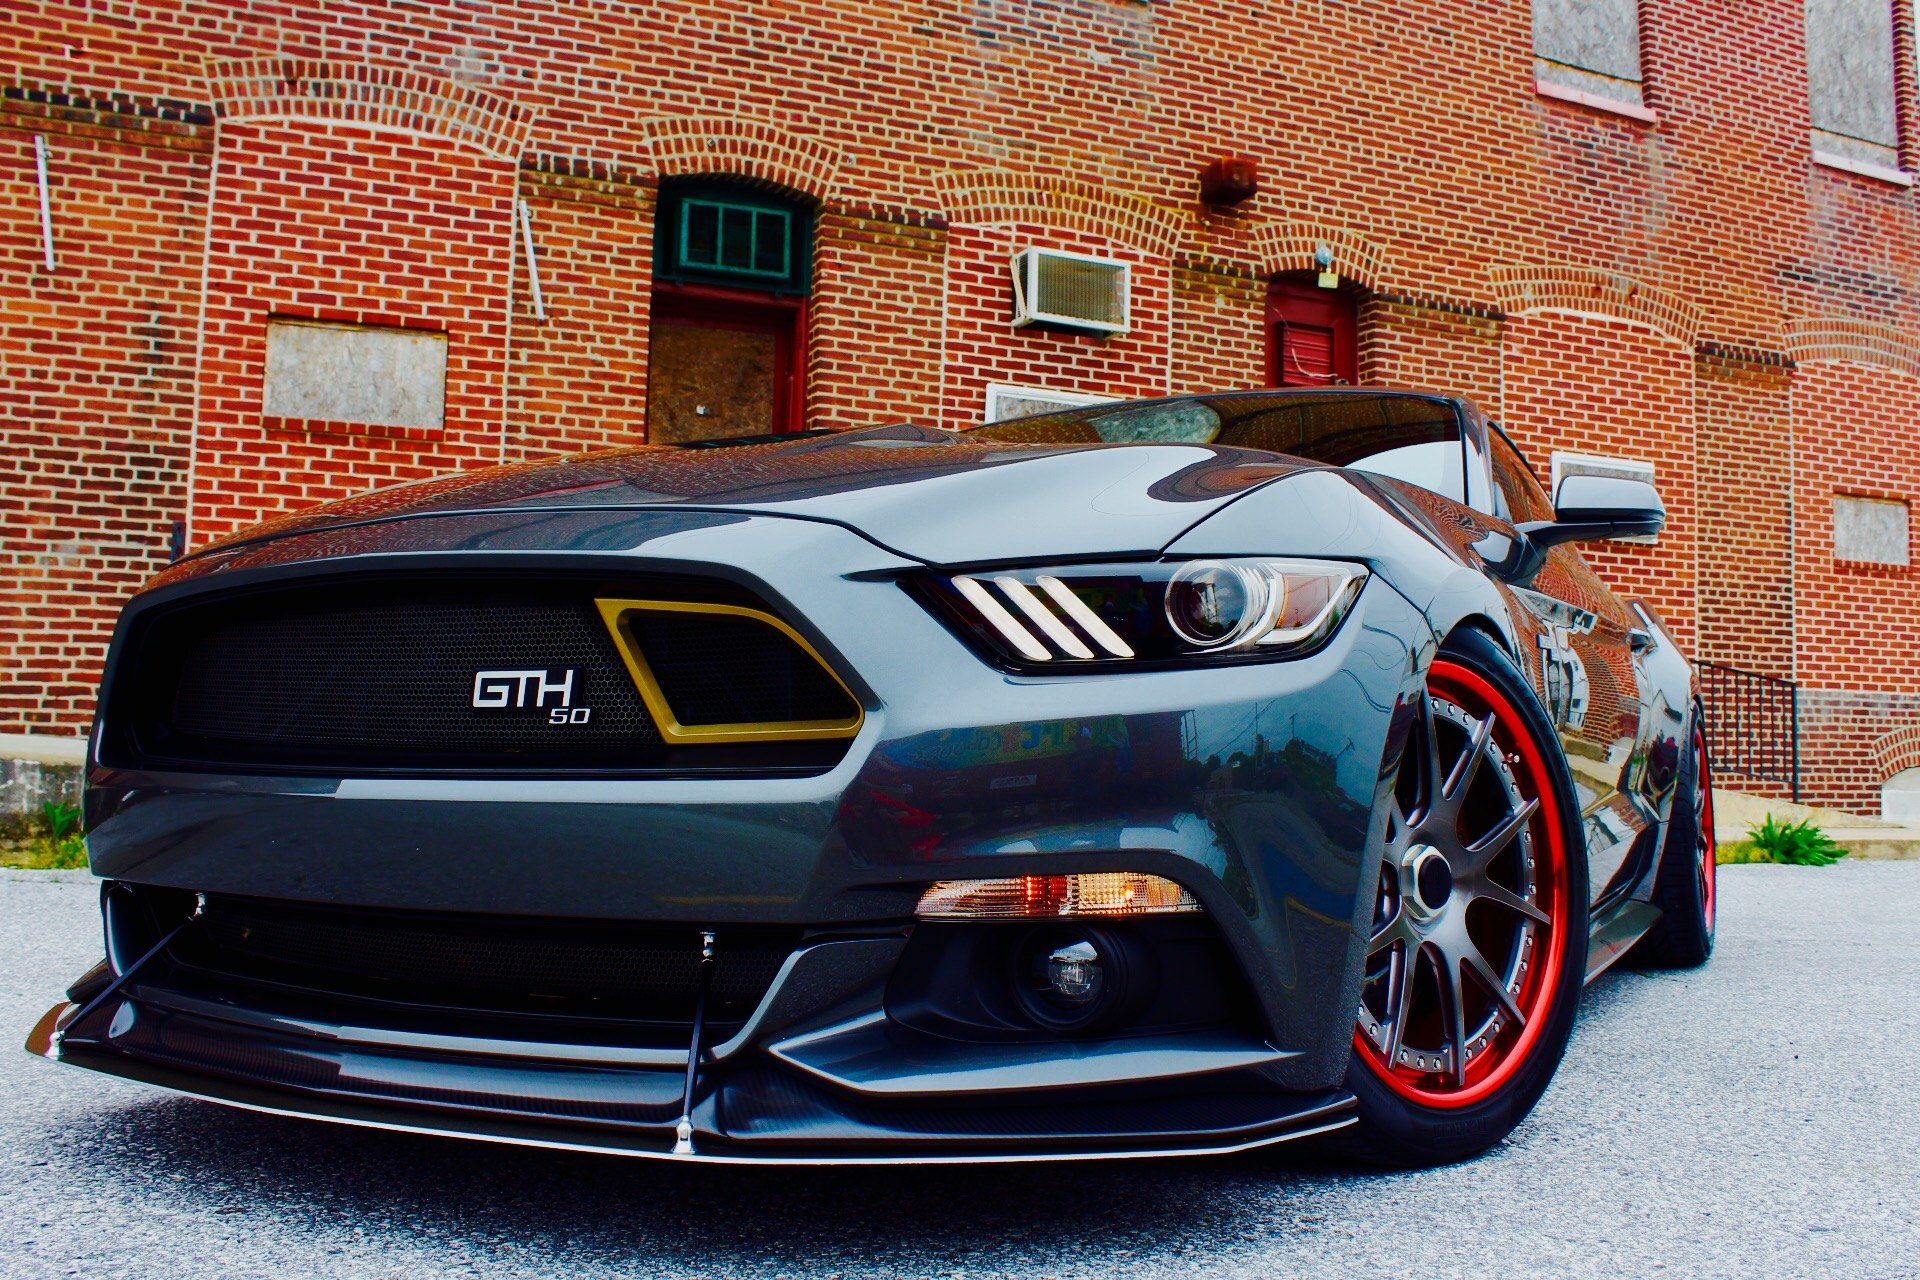 Custom Mesh Grille on Black Ford Mustang GTH 50 - Photo by Forgeline Motorsports